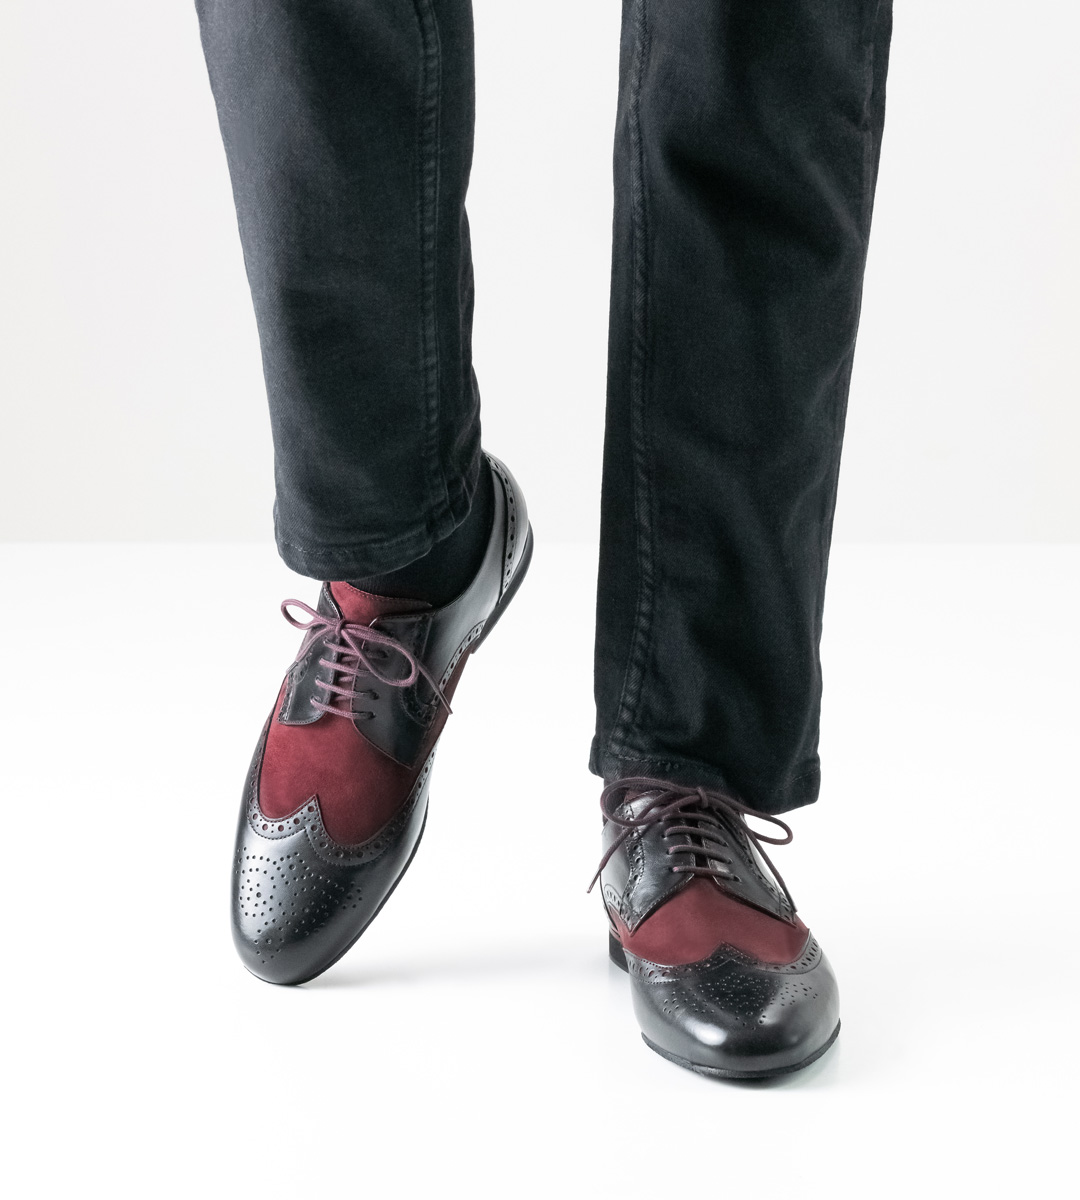 black jeans in combination with Werner Kern men's dance shoe with Budapest pattern